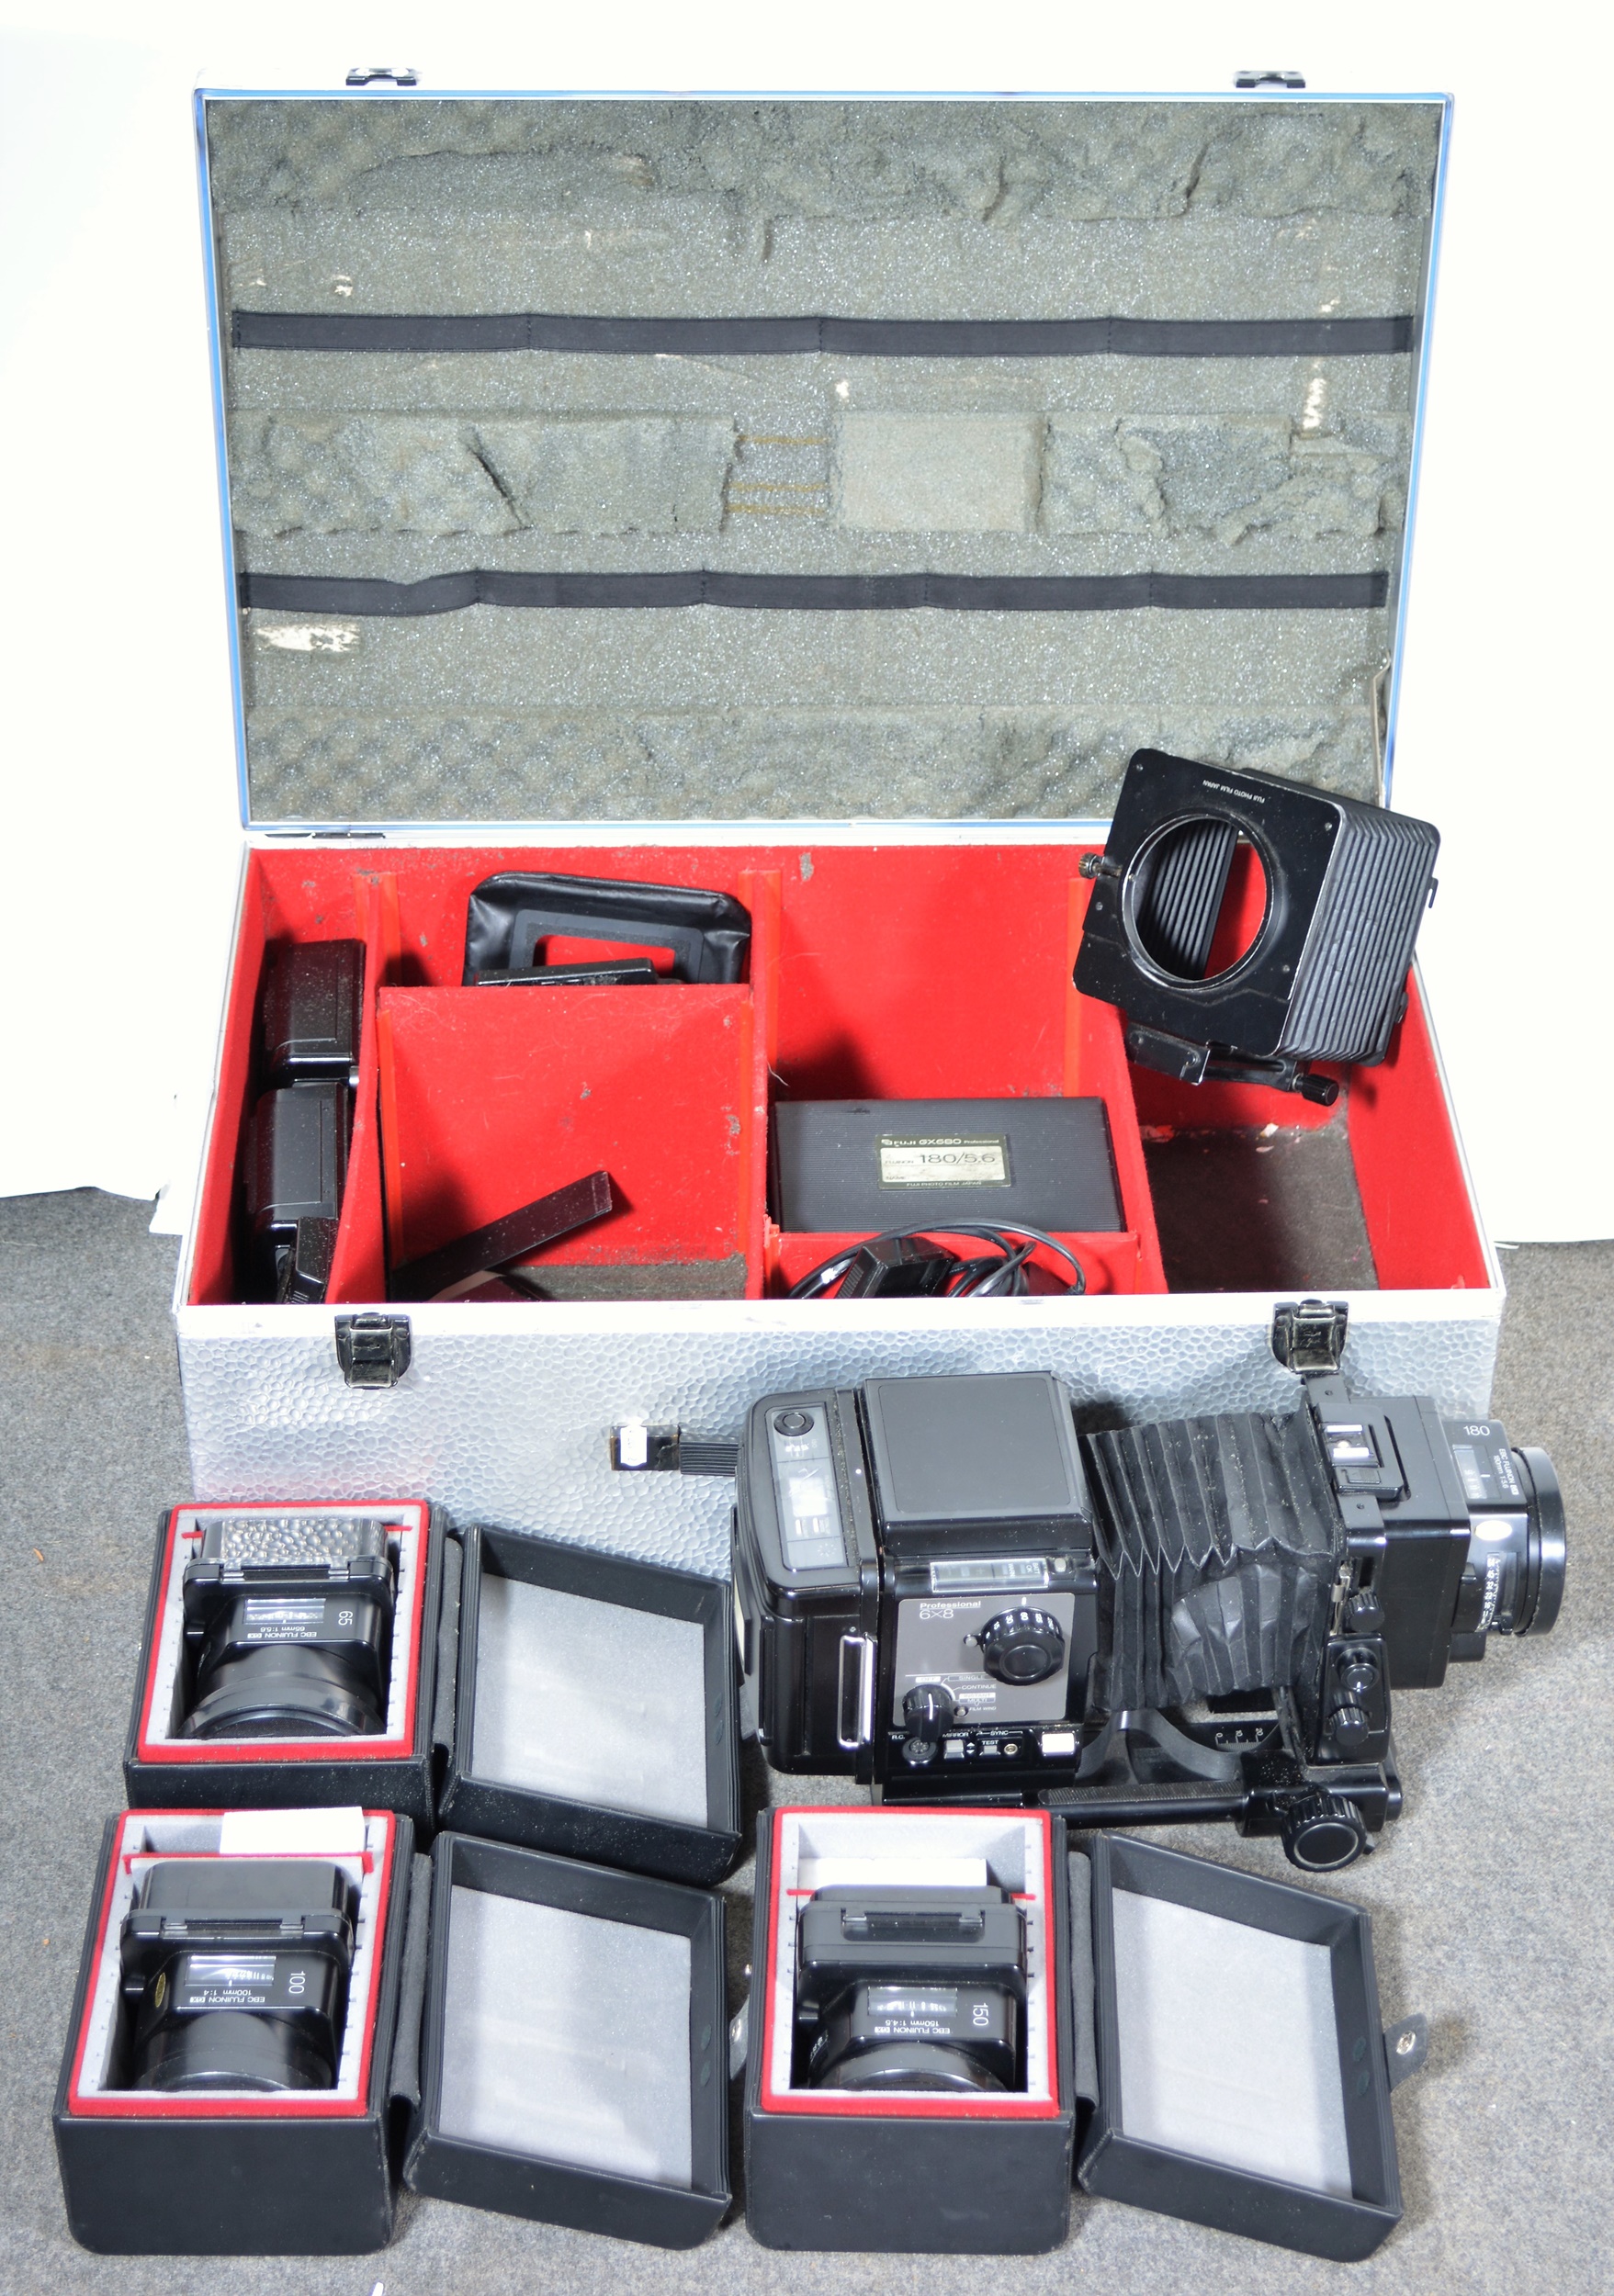 Fuji GX680 6x8 Professional camera outfit, lenses and case. - Image 3 of 3